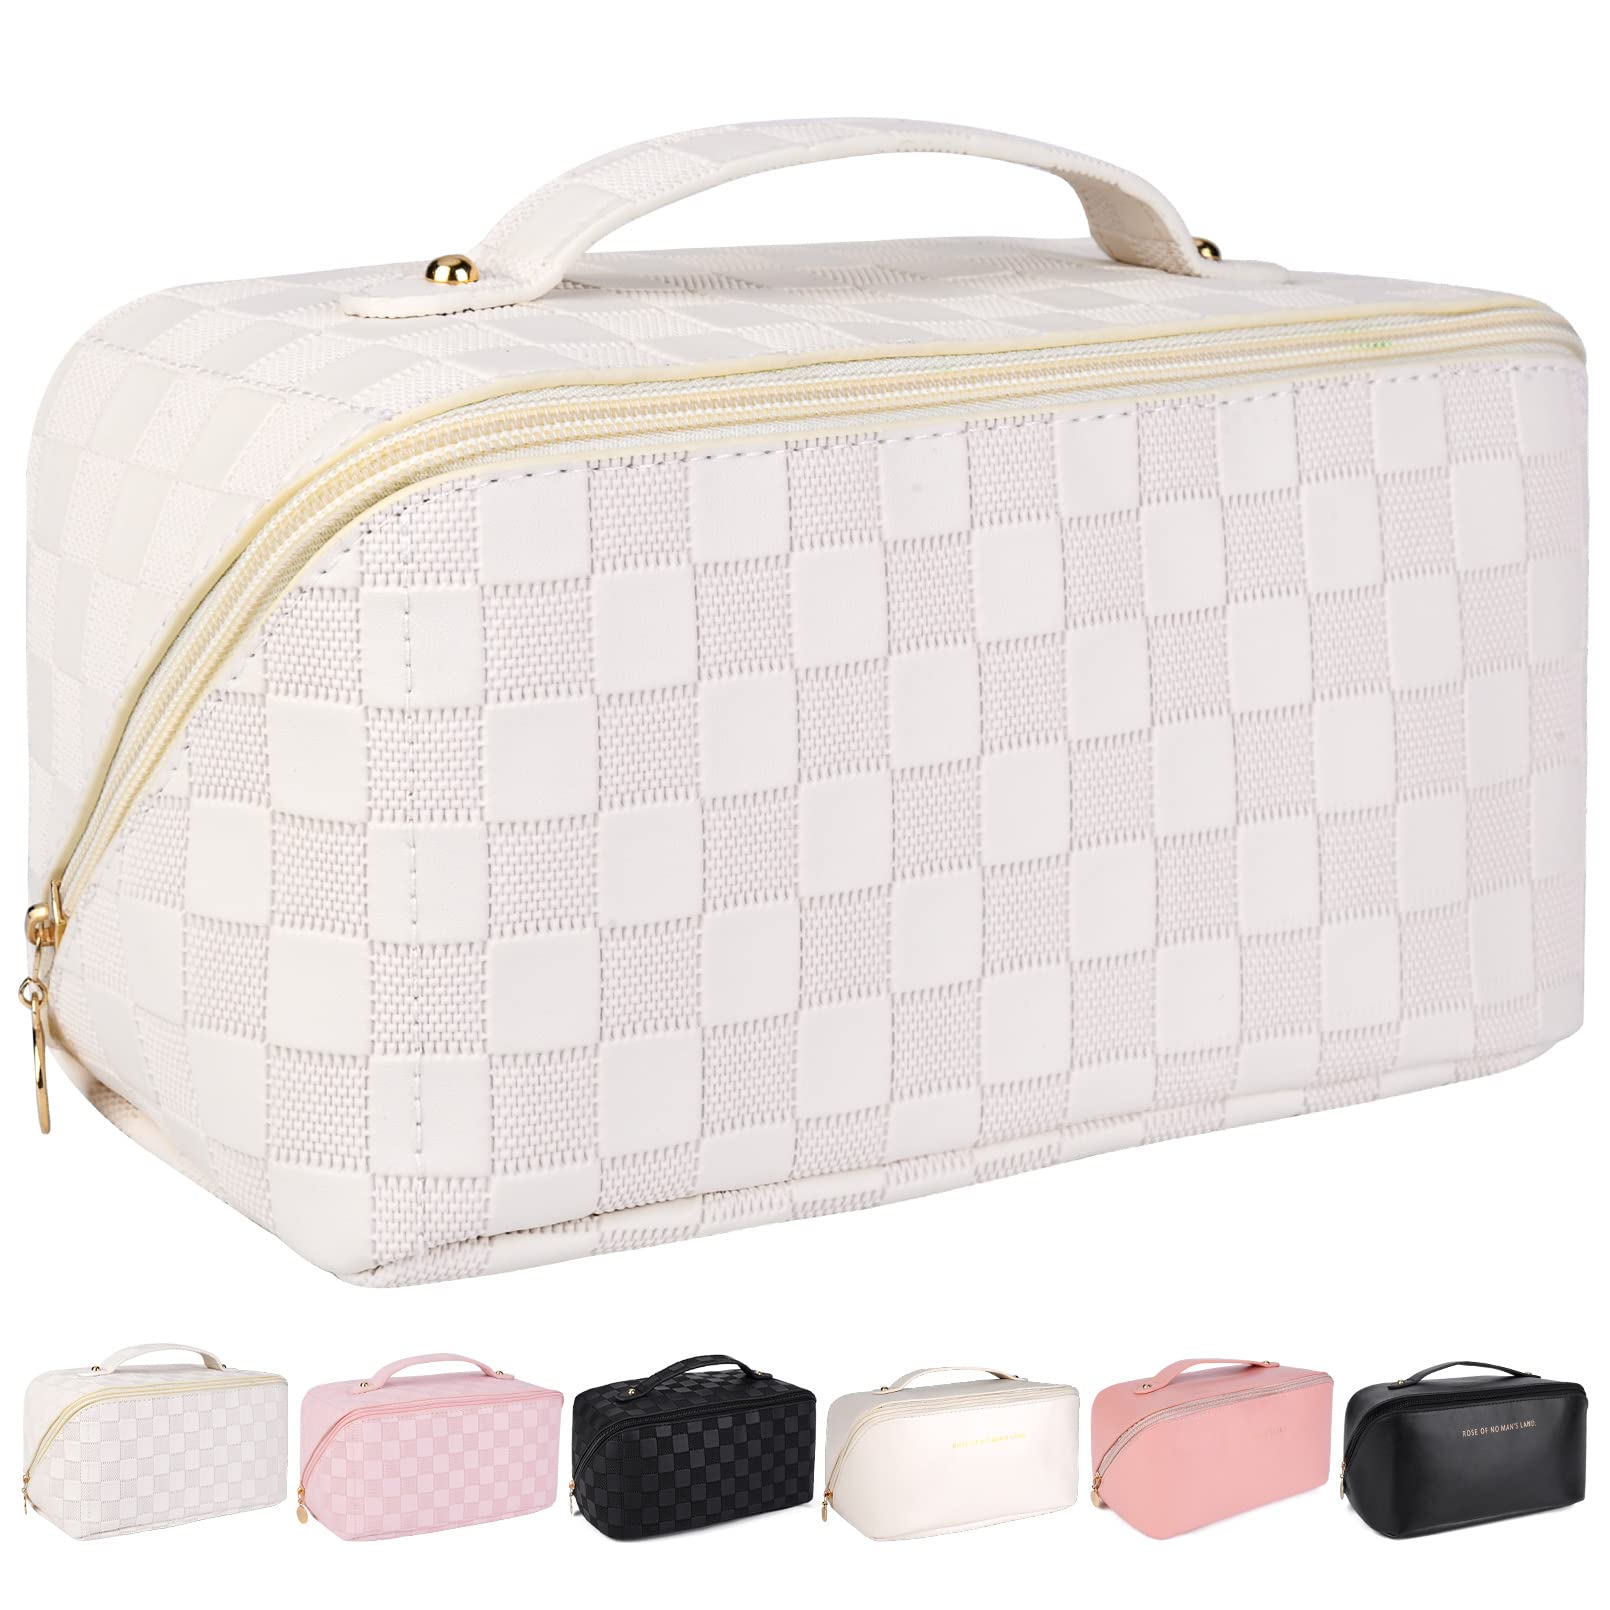 Travel Makeup Bag for Women Large Capacity Cosmetic Bag Waterproof White Checkered Portable PU Leather Toiletry Bag Organizer Makeup Brushes Storage Bag with Dividers and Handle